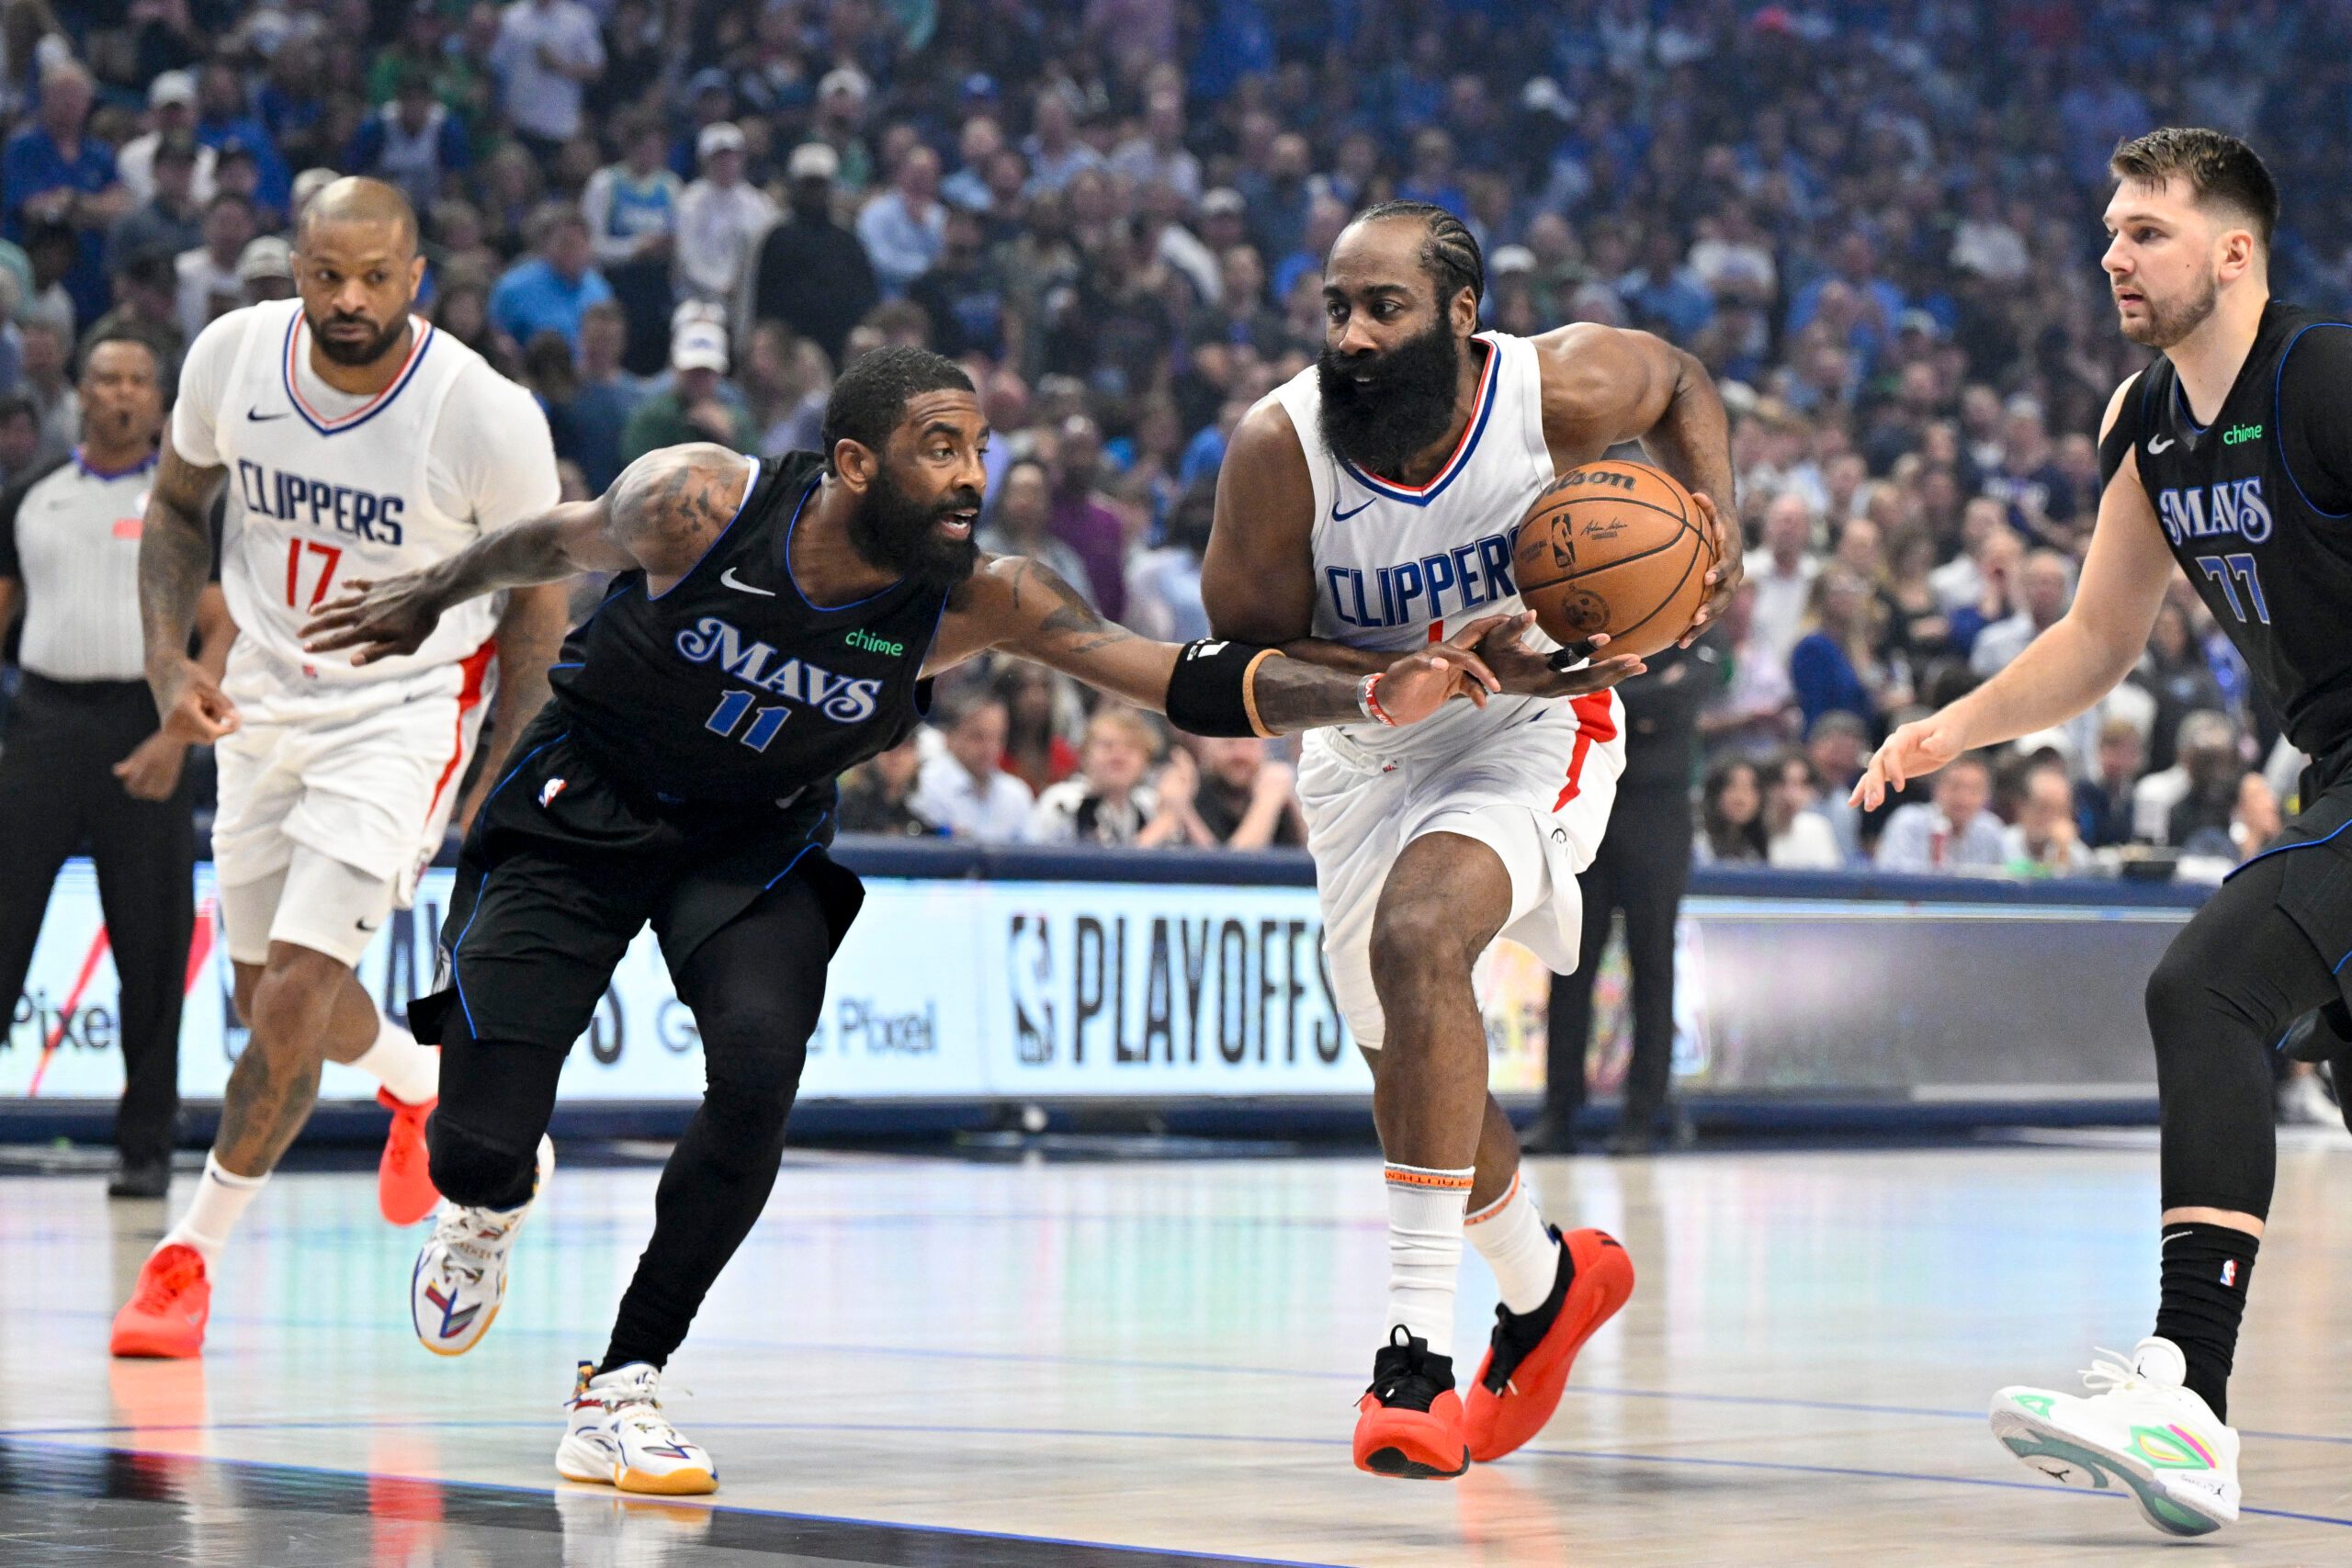 Kyrie Irving erupts for 28 in 2nd half; Mavericks blast Clippers out of contention